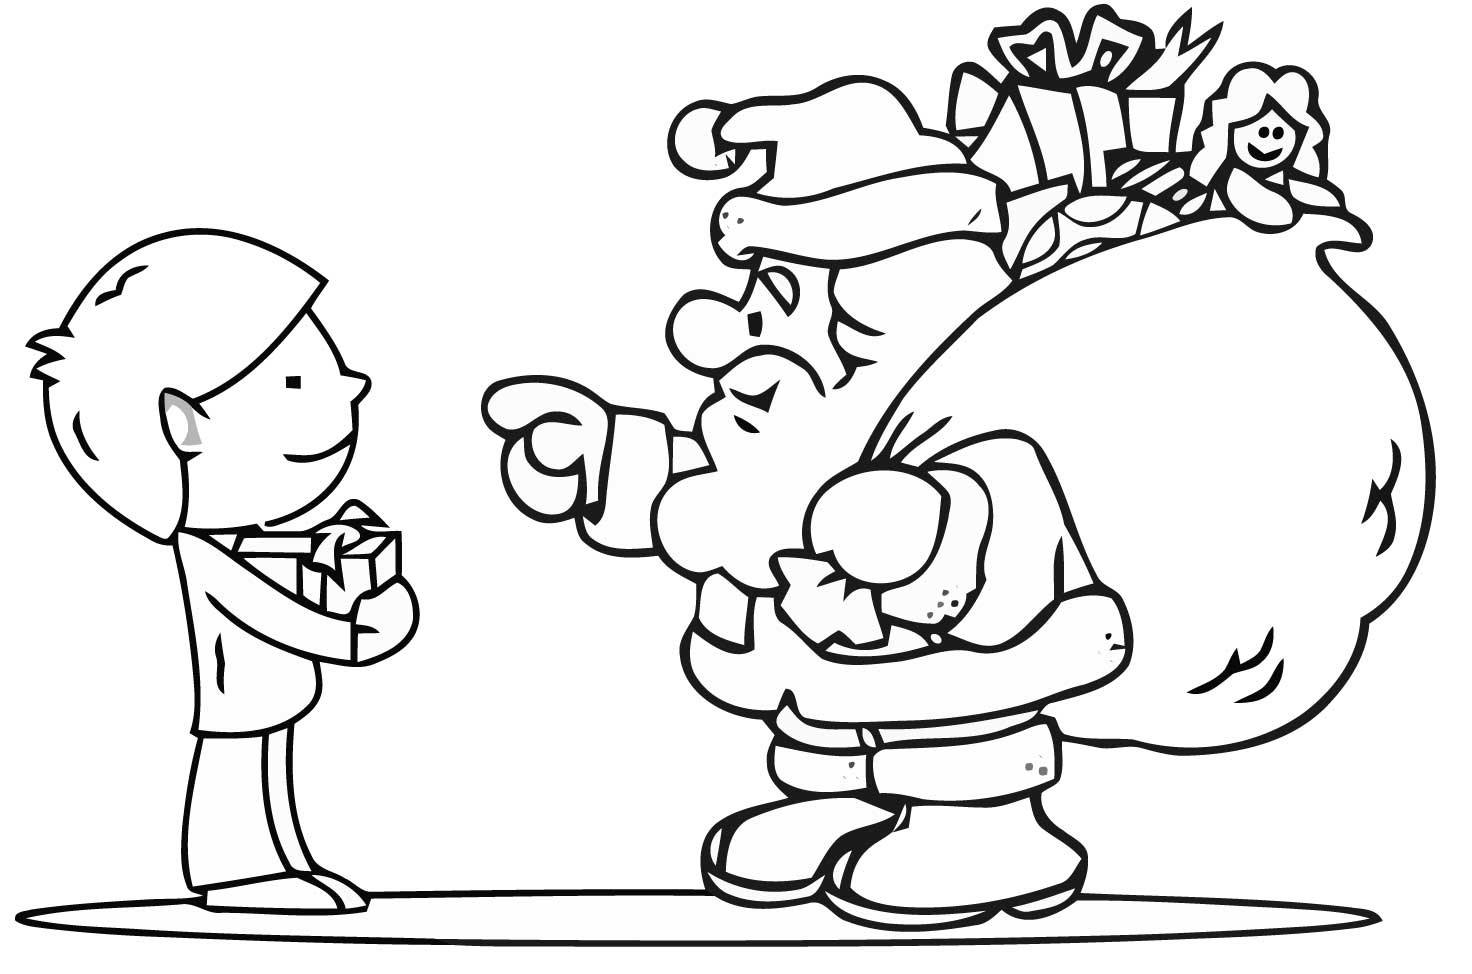 Father Christmas Pictures To Colour - Cliparts.co